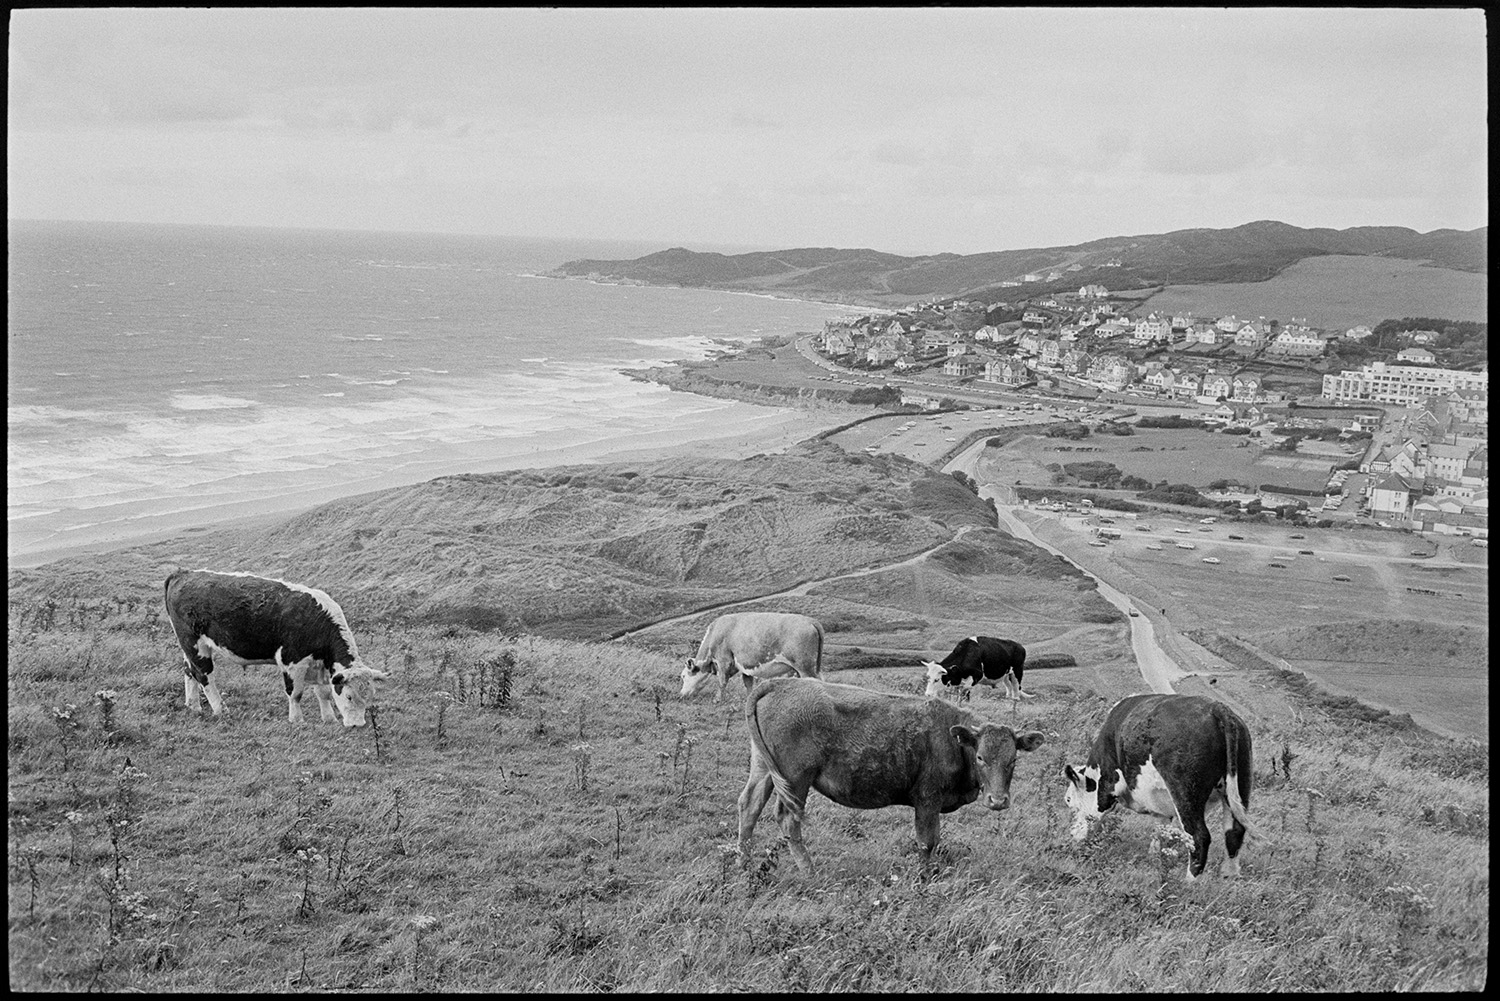 Bullocks grazing above seascape.
[Bullocks grazing in a meadow overlooking Woolacombe beach and sand dunes. Woolacombe town and the sea are visible in the background.]